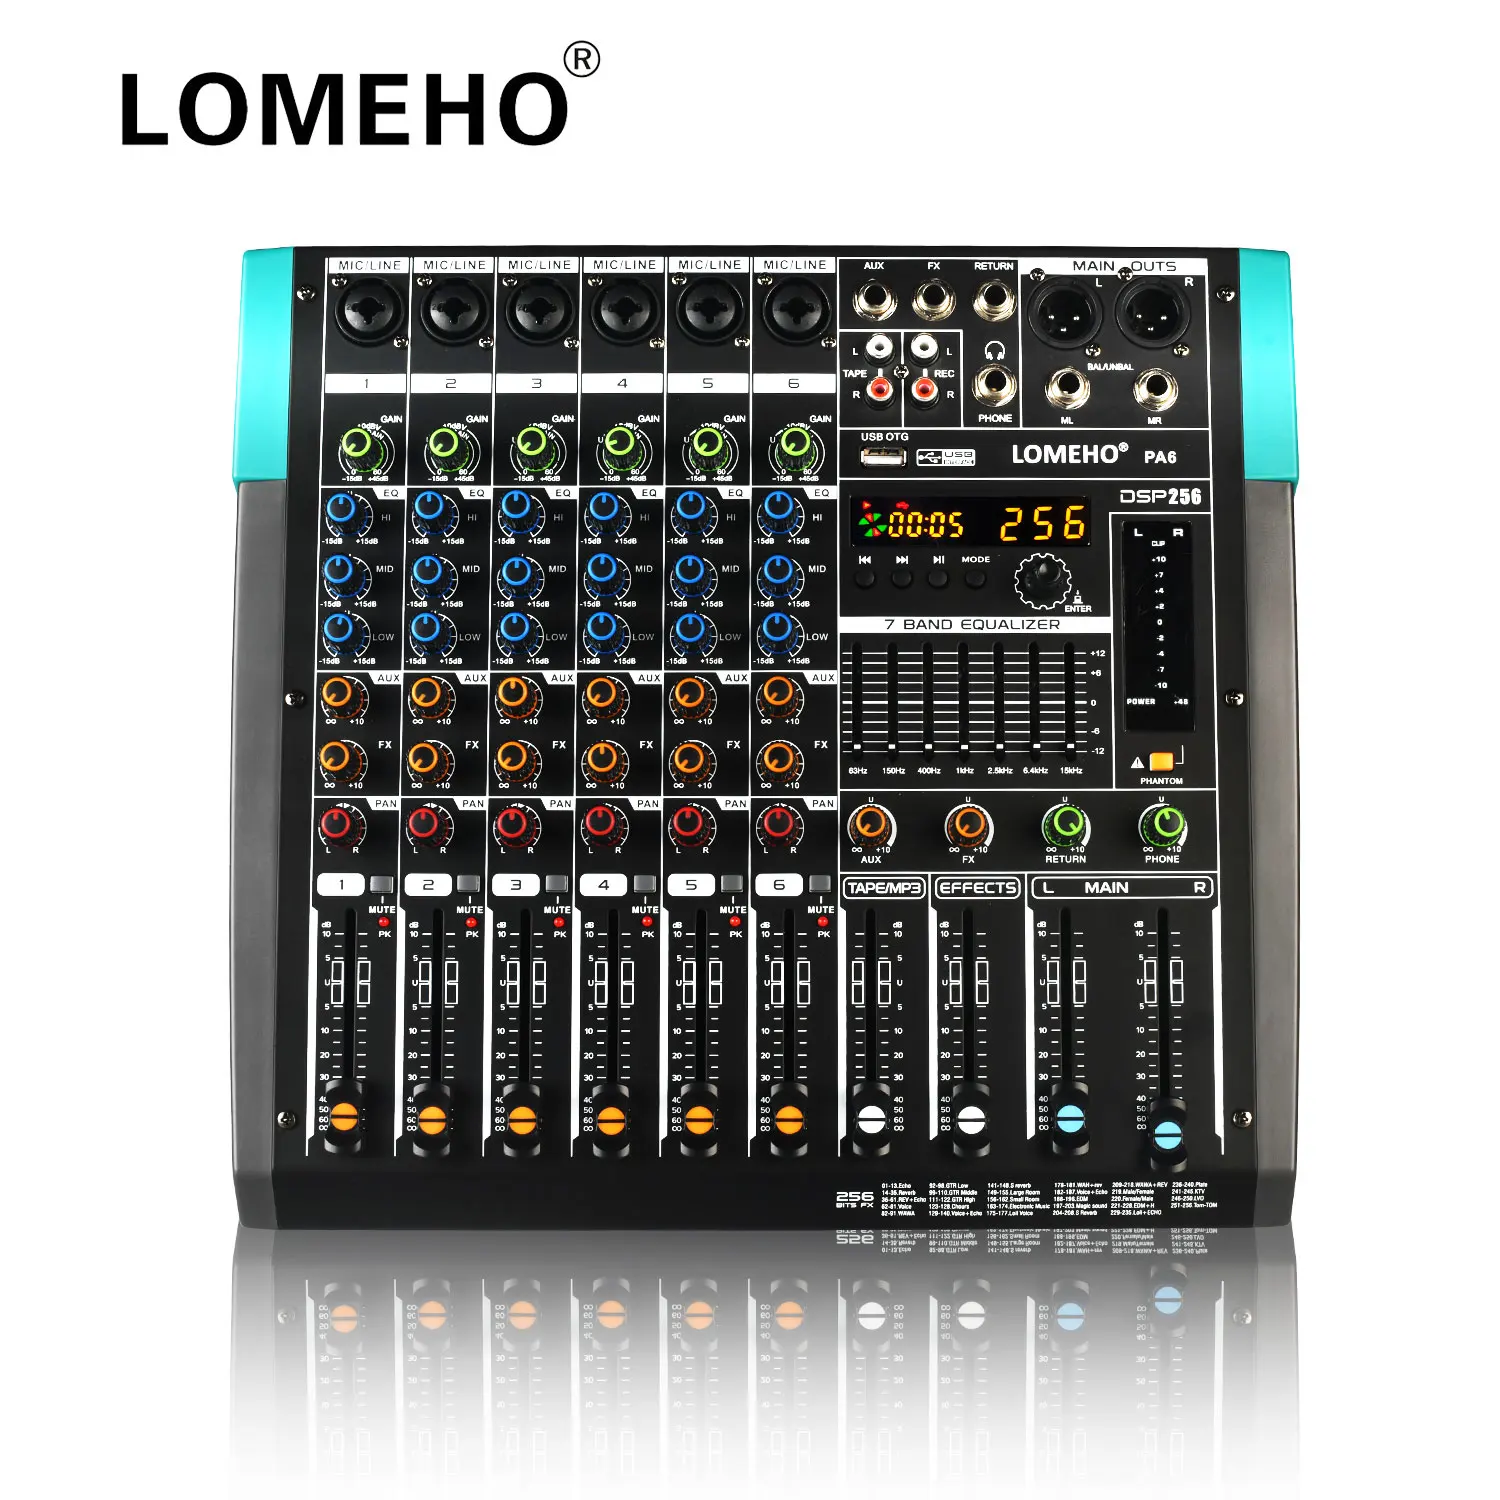 

LOMEHO BT 6 Channels Mixing Console 24 Bit 256 Digital Effects 7 Band EQ Sound Table Audio Mixer 48V USB PC Play Record DJ PA6